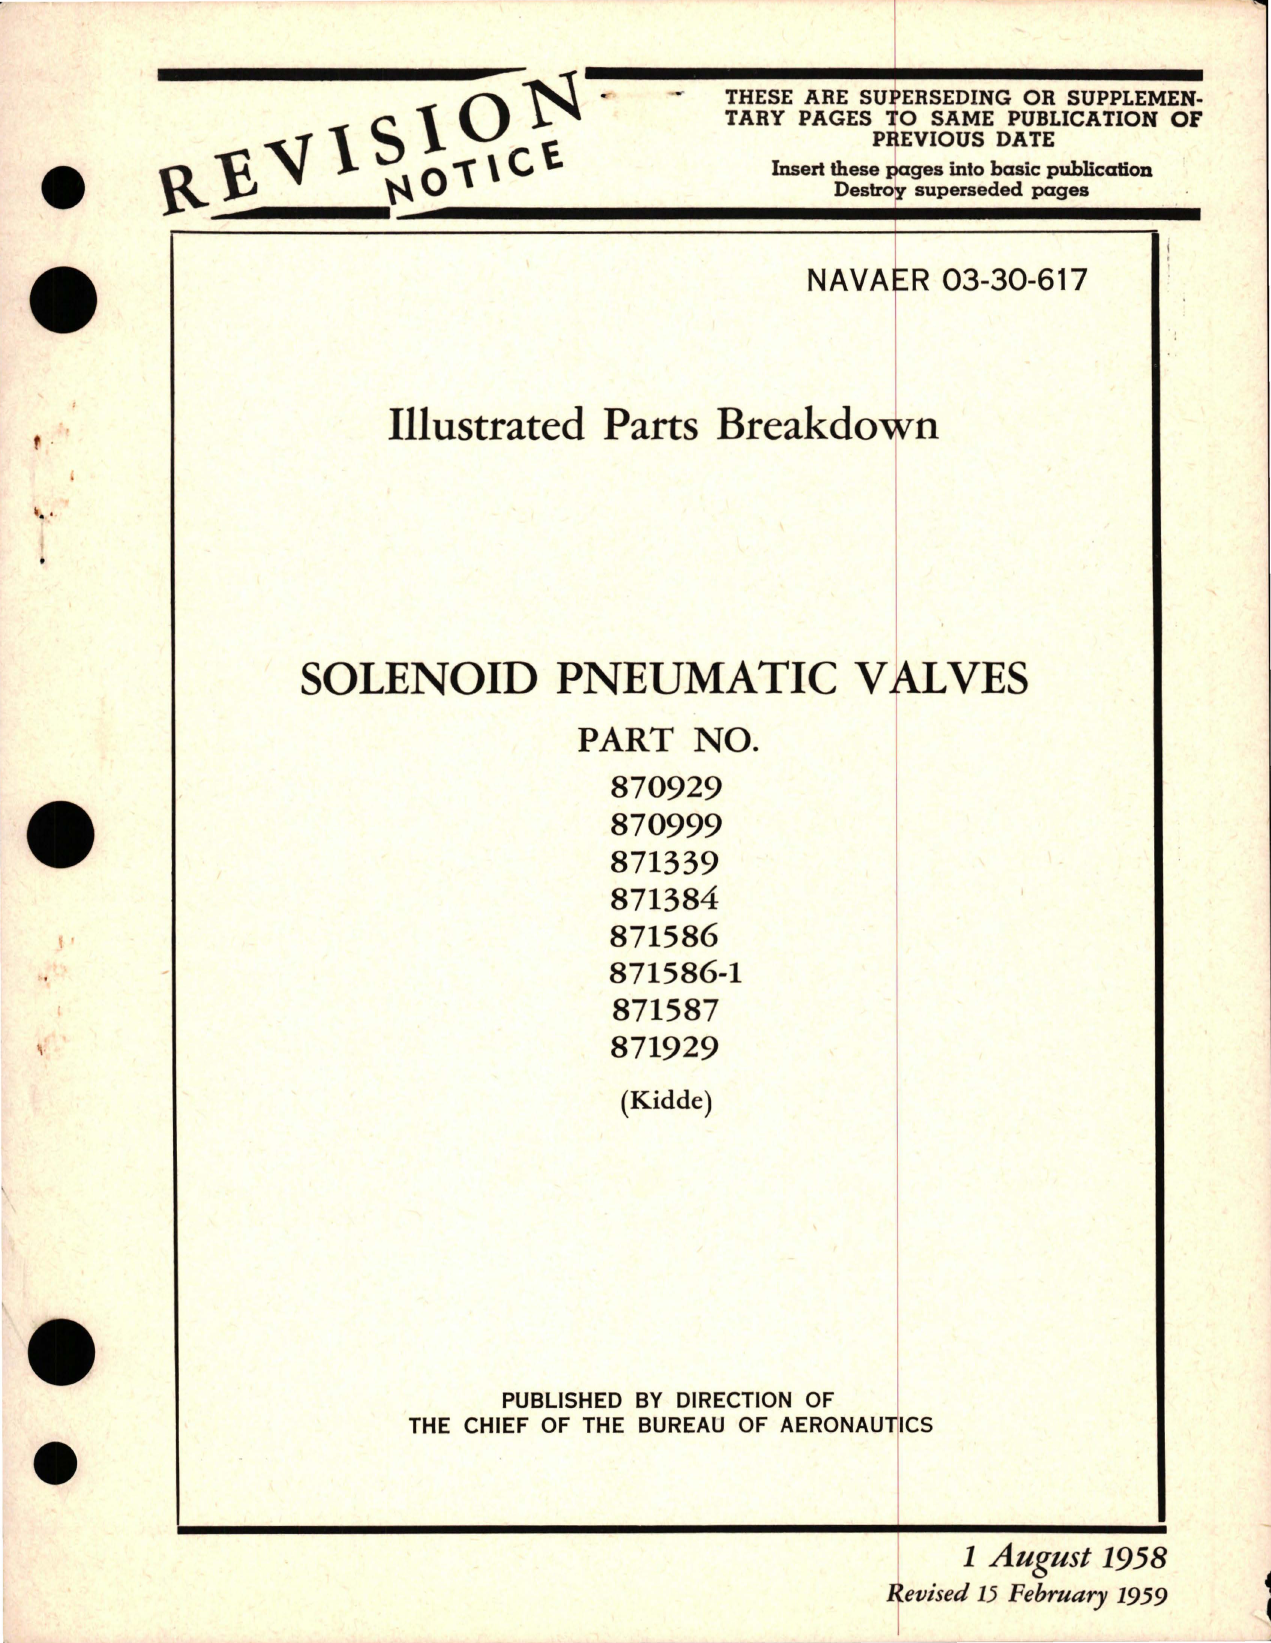 Sample page 1 from AirCorps Library document: Illustrated Parts Breakdown for Solenoid Pneumatic Valves